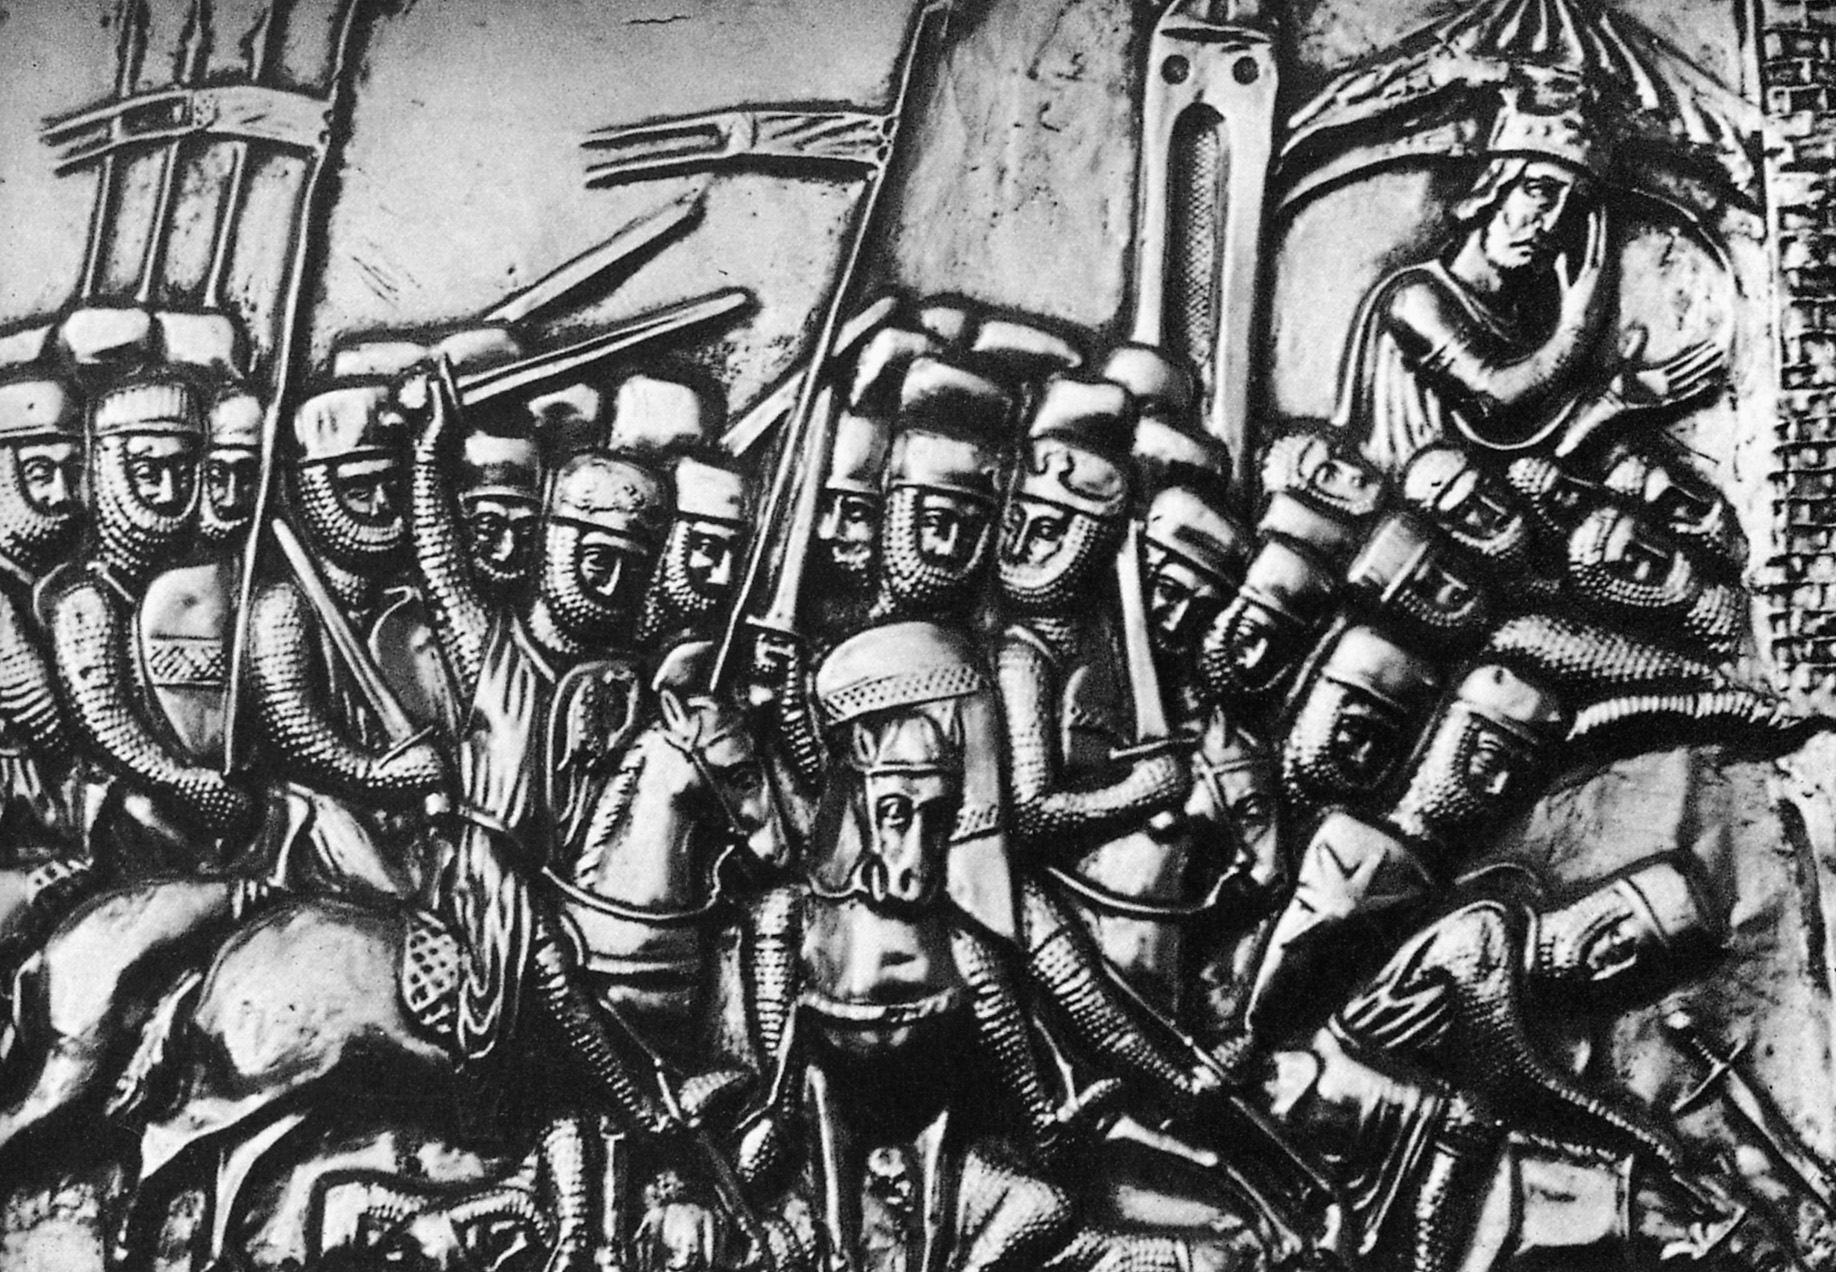 A 13th century metal casket depicts a force of heavily armored Teutonic Knights charging in full battle array.